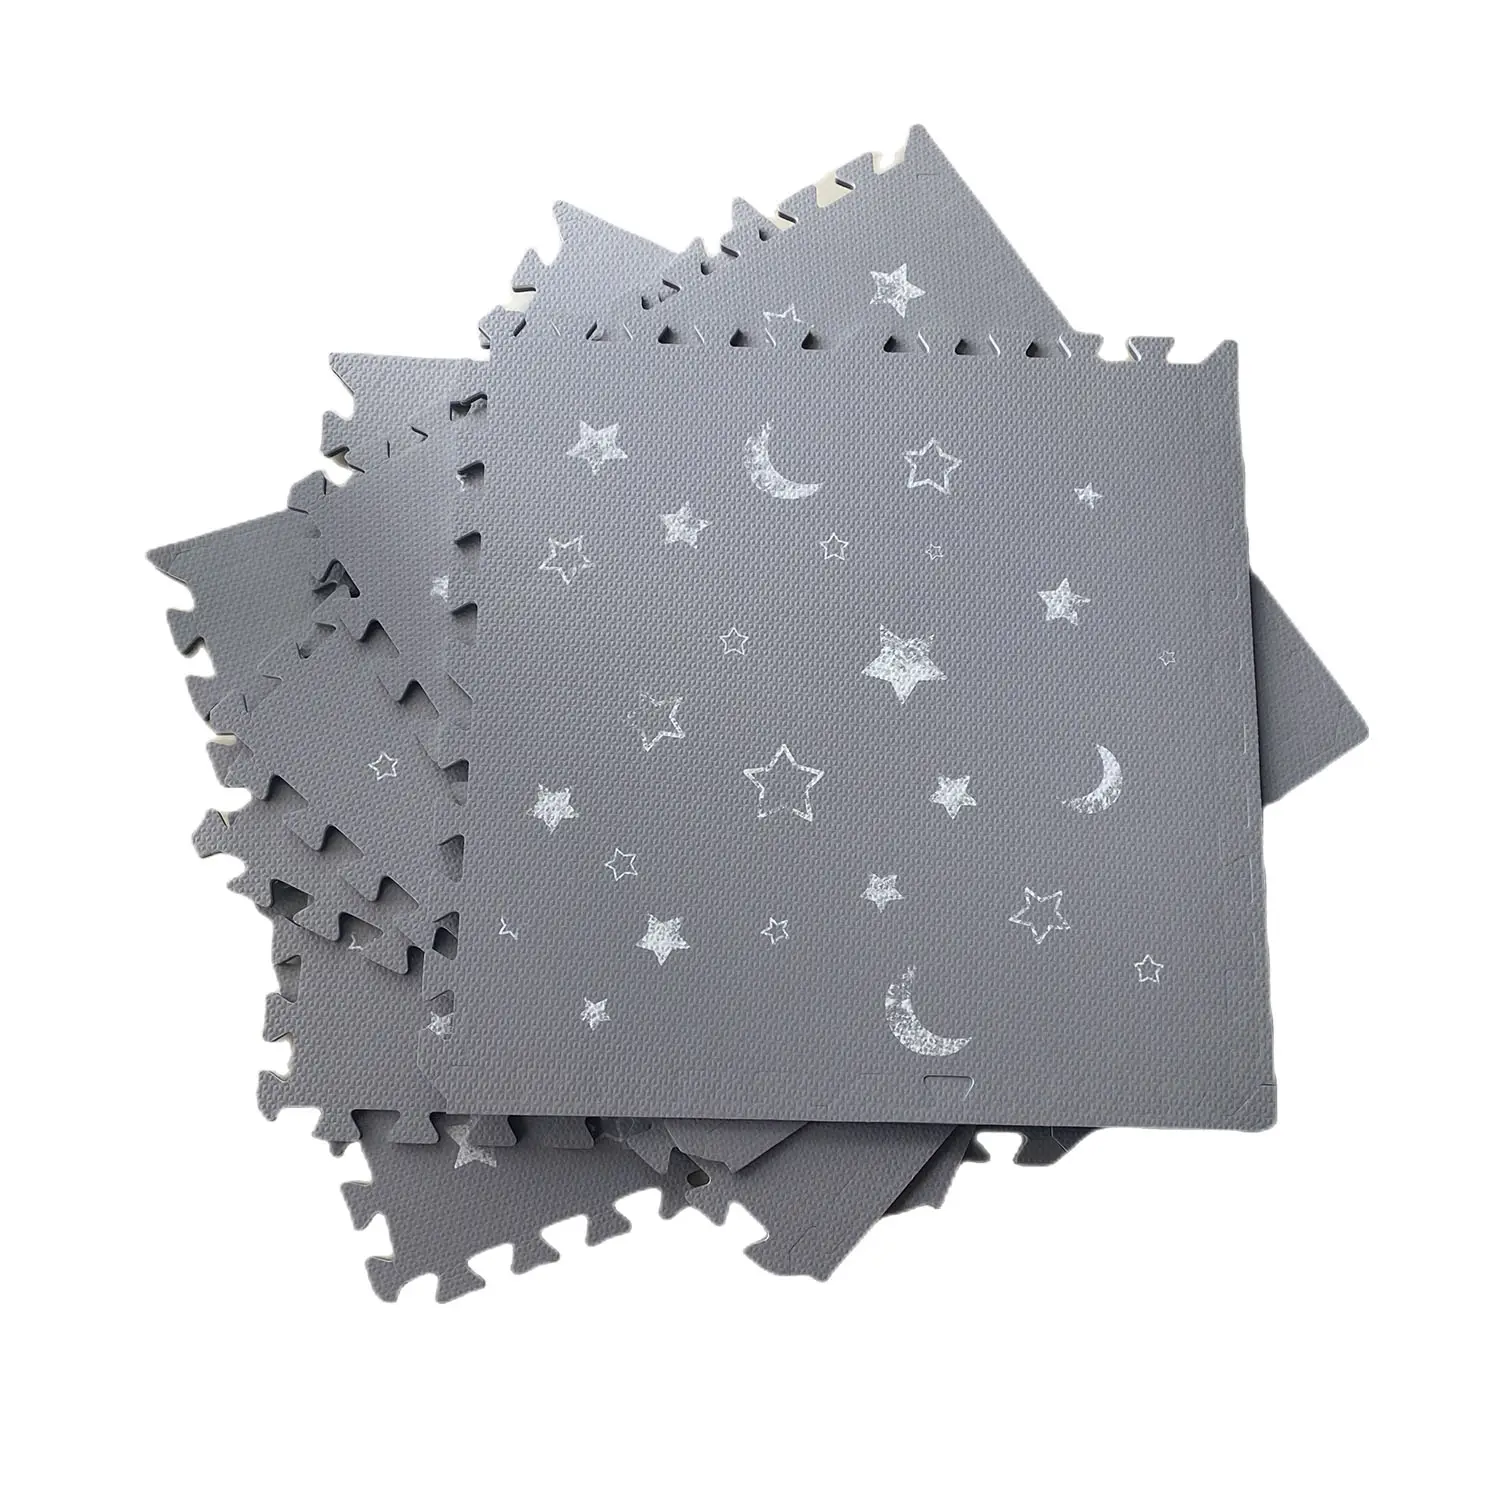 Soft New Star and Moon Design Gray EVA Mat for Baby Crawling Baby Activities and Gym